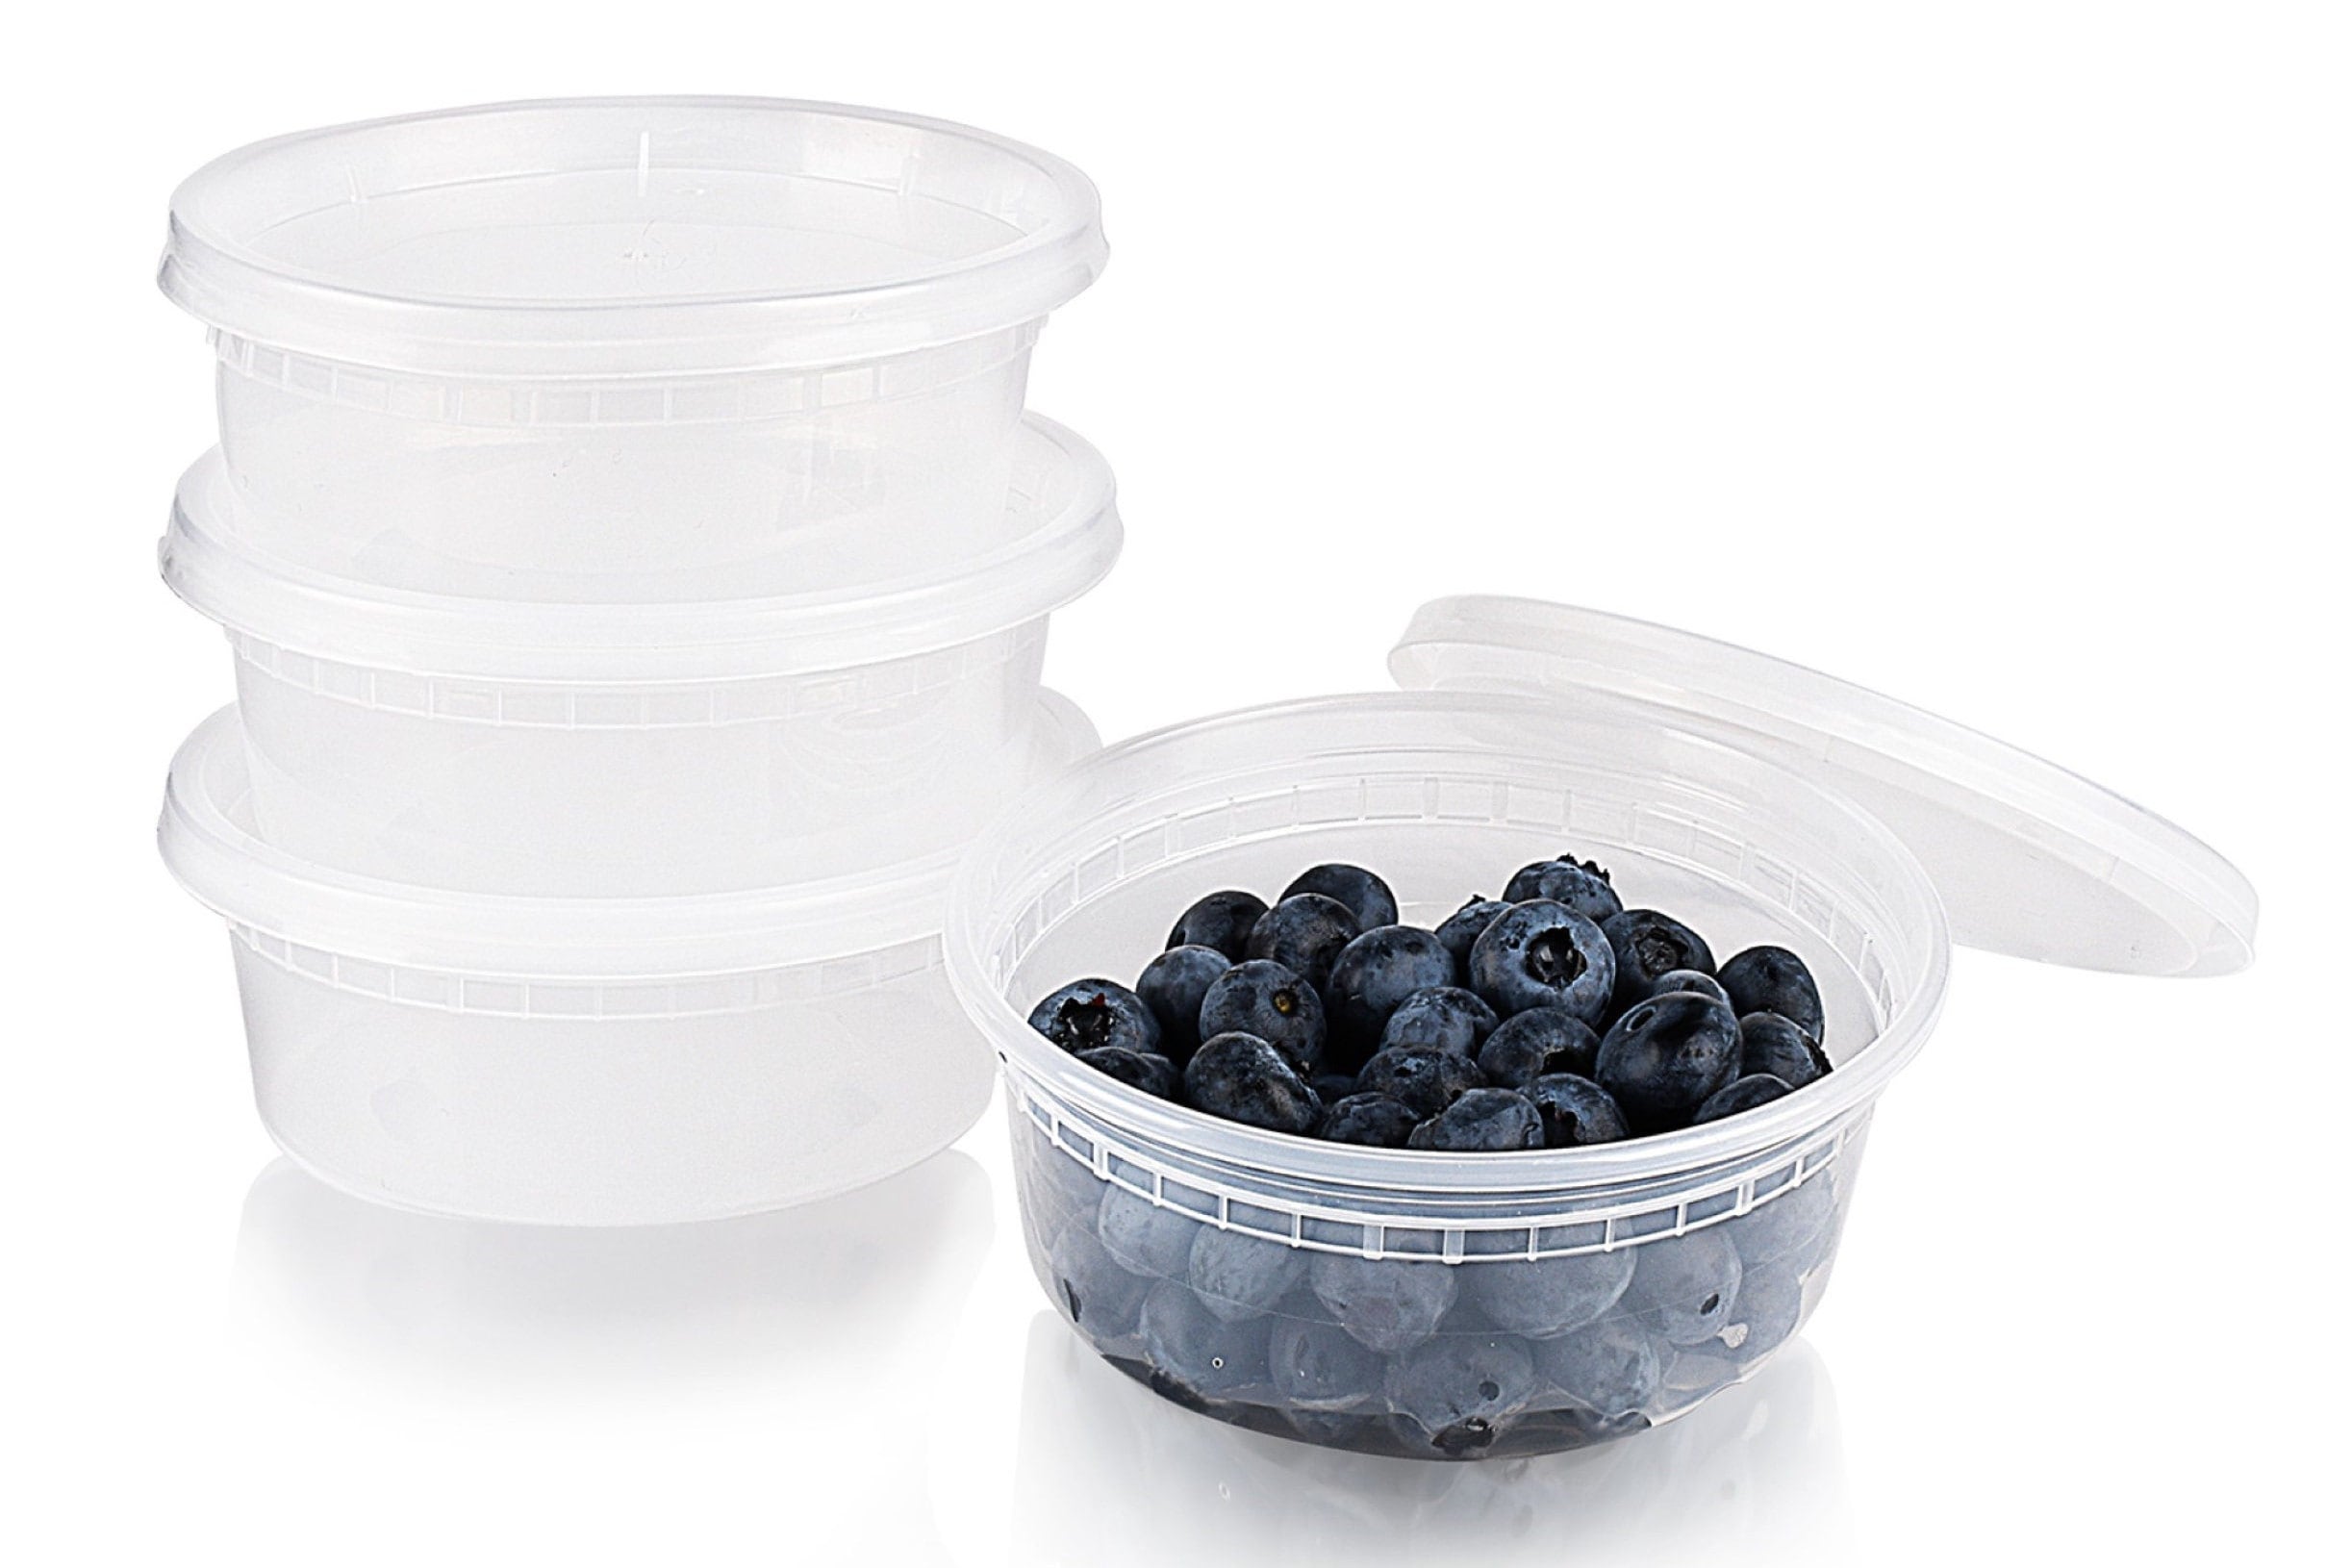 Deli Containers Heavy-duty with airtight lids-12 Oz- 240 sets/case – Ampack